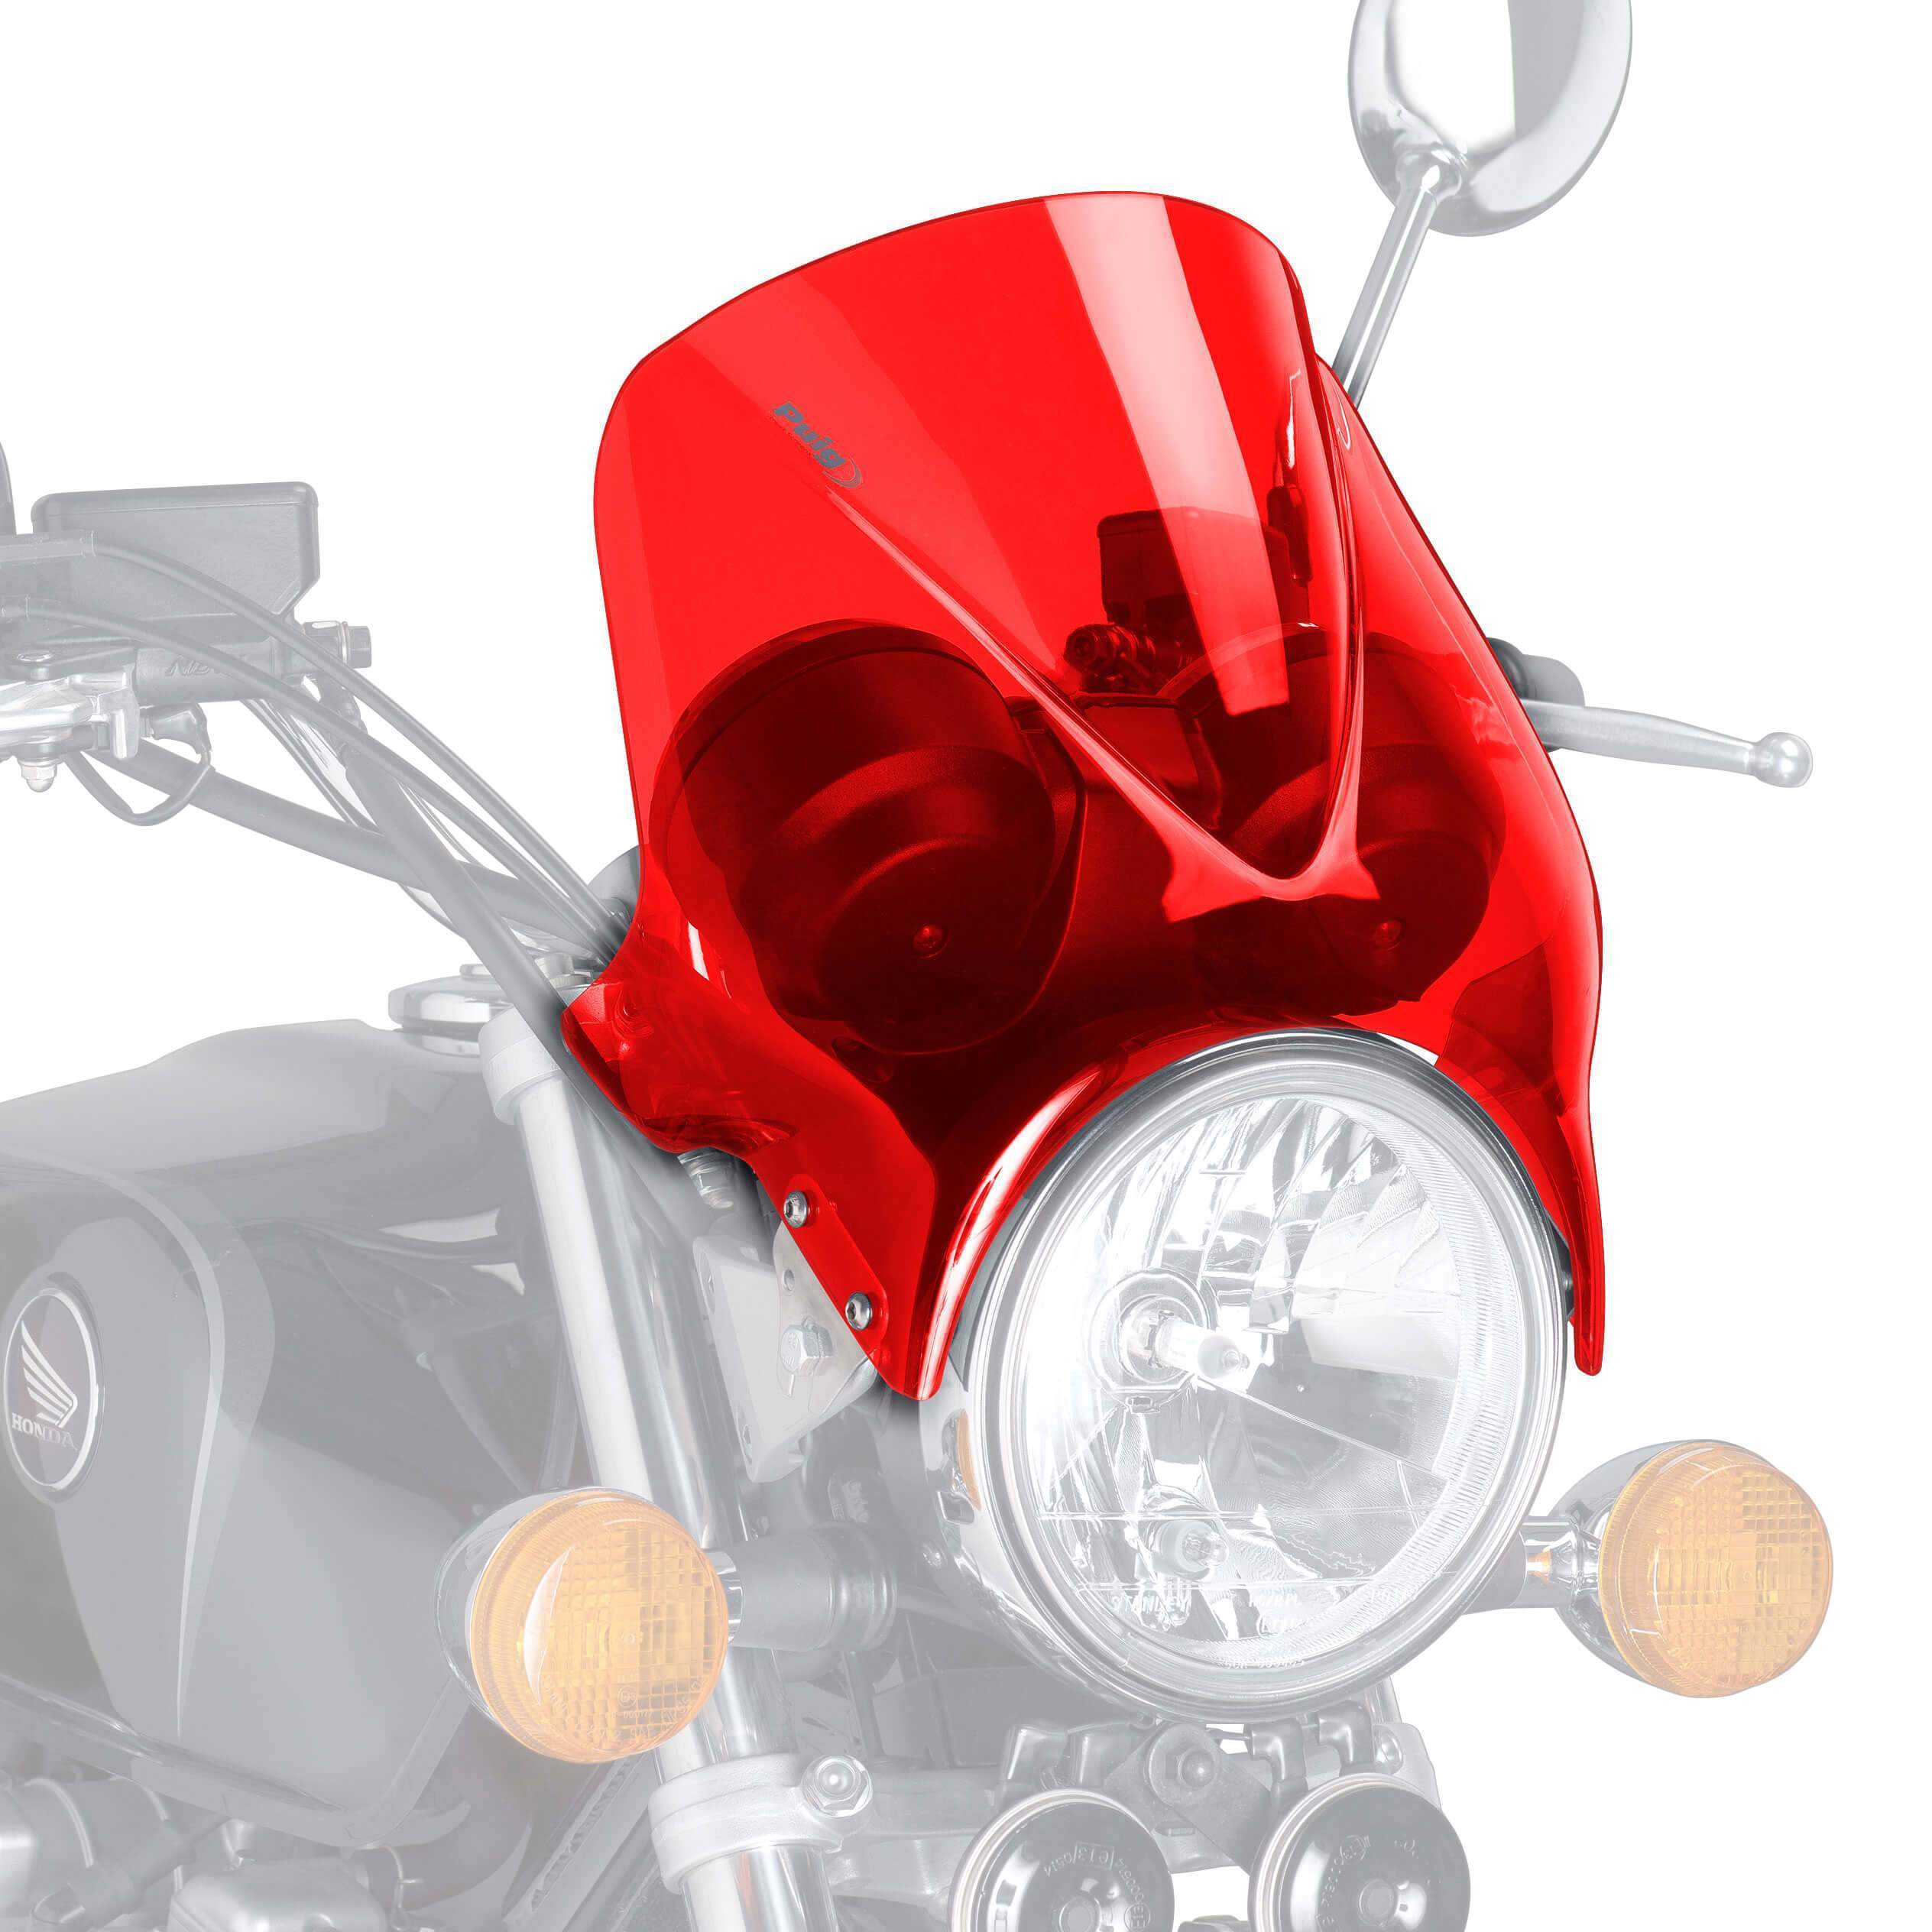 Puig Windy Screen | Red | Kawasaki W 800 2011>Current-M1482R-Screens-Pyramid Motorcycle Accessories